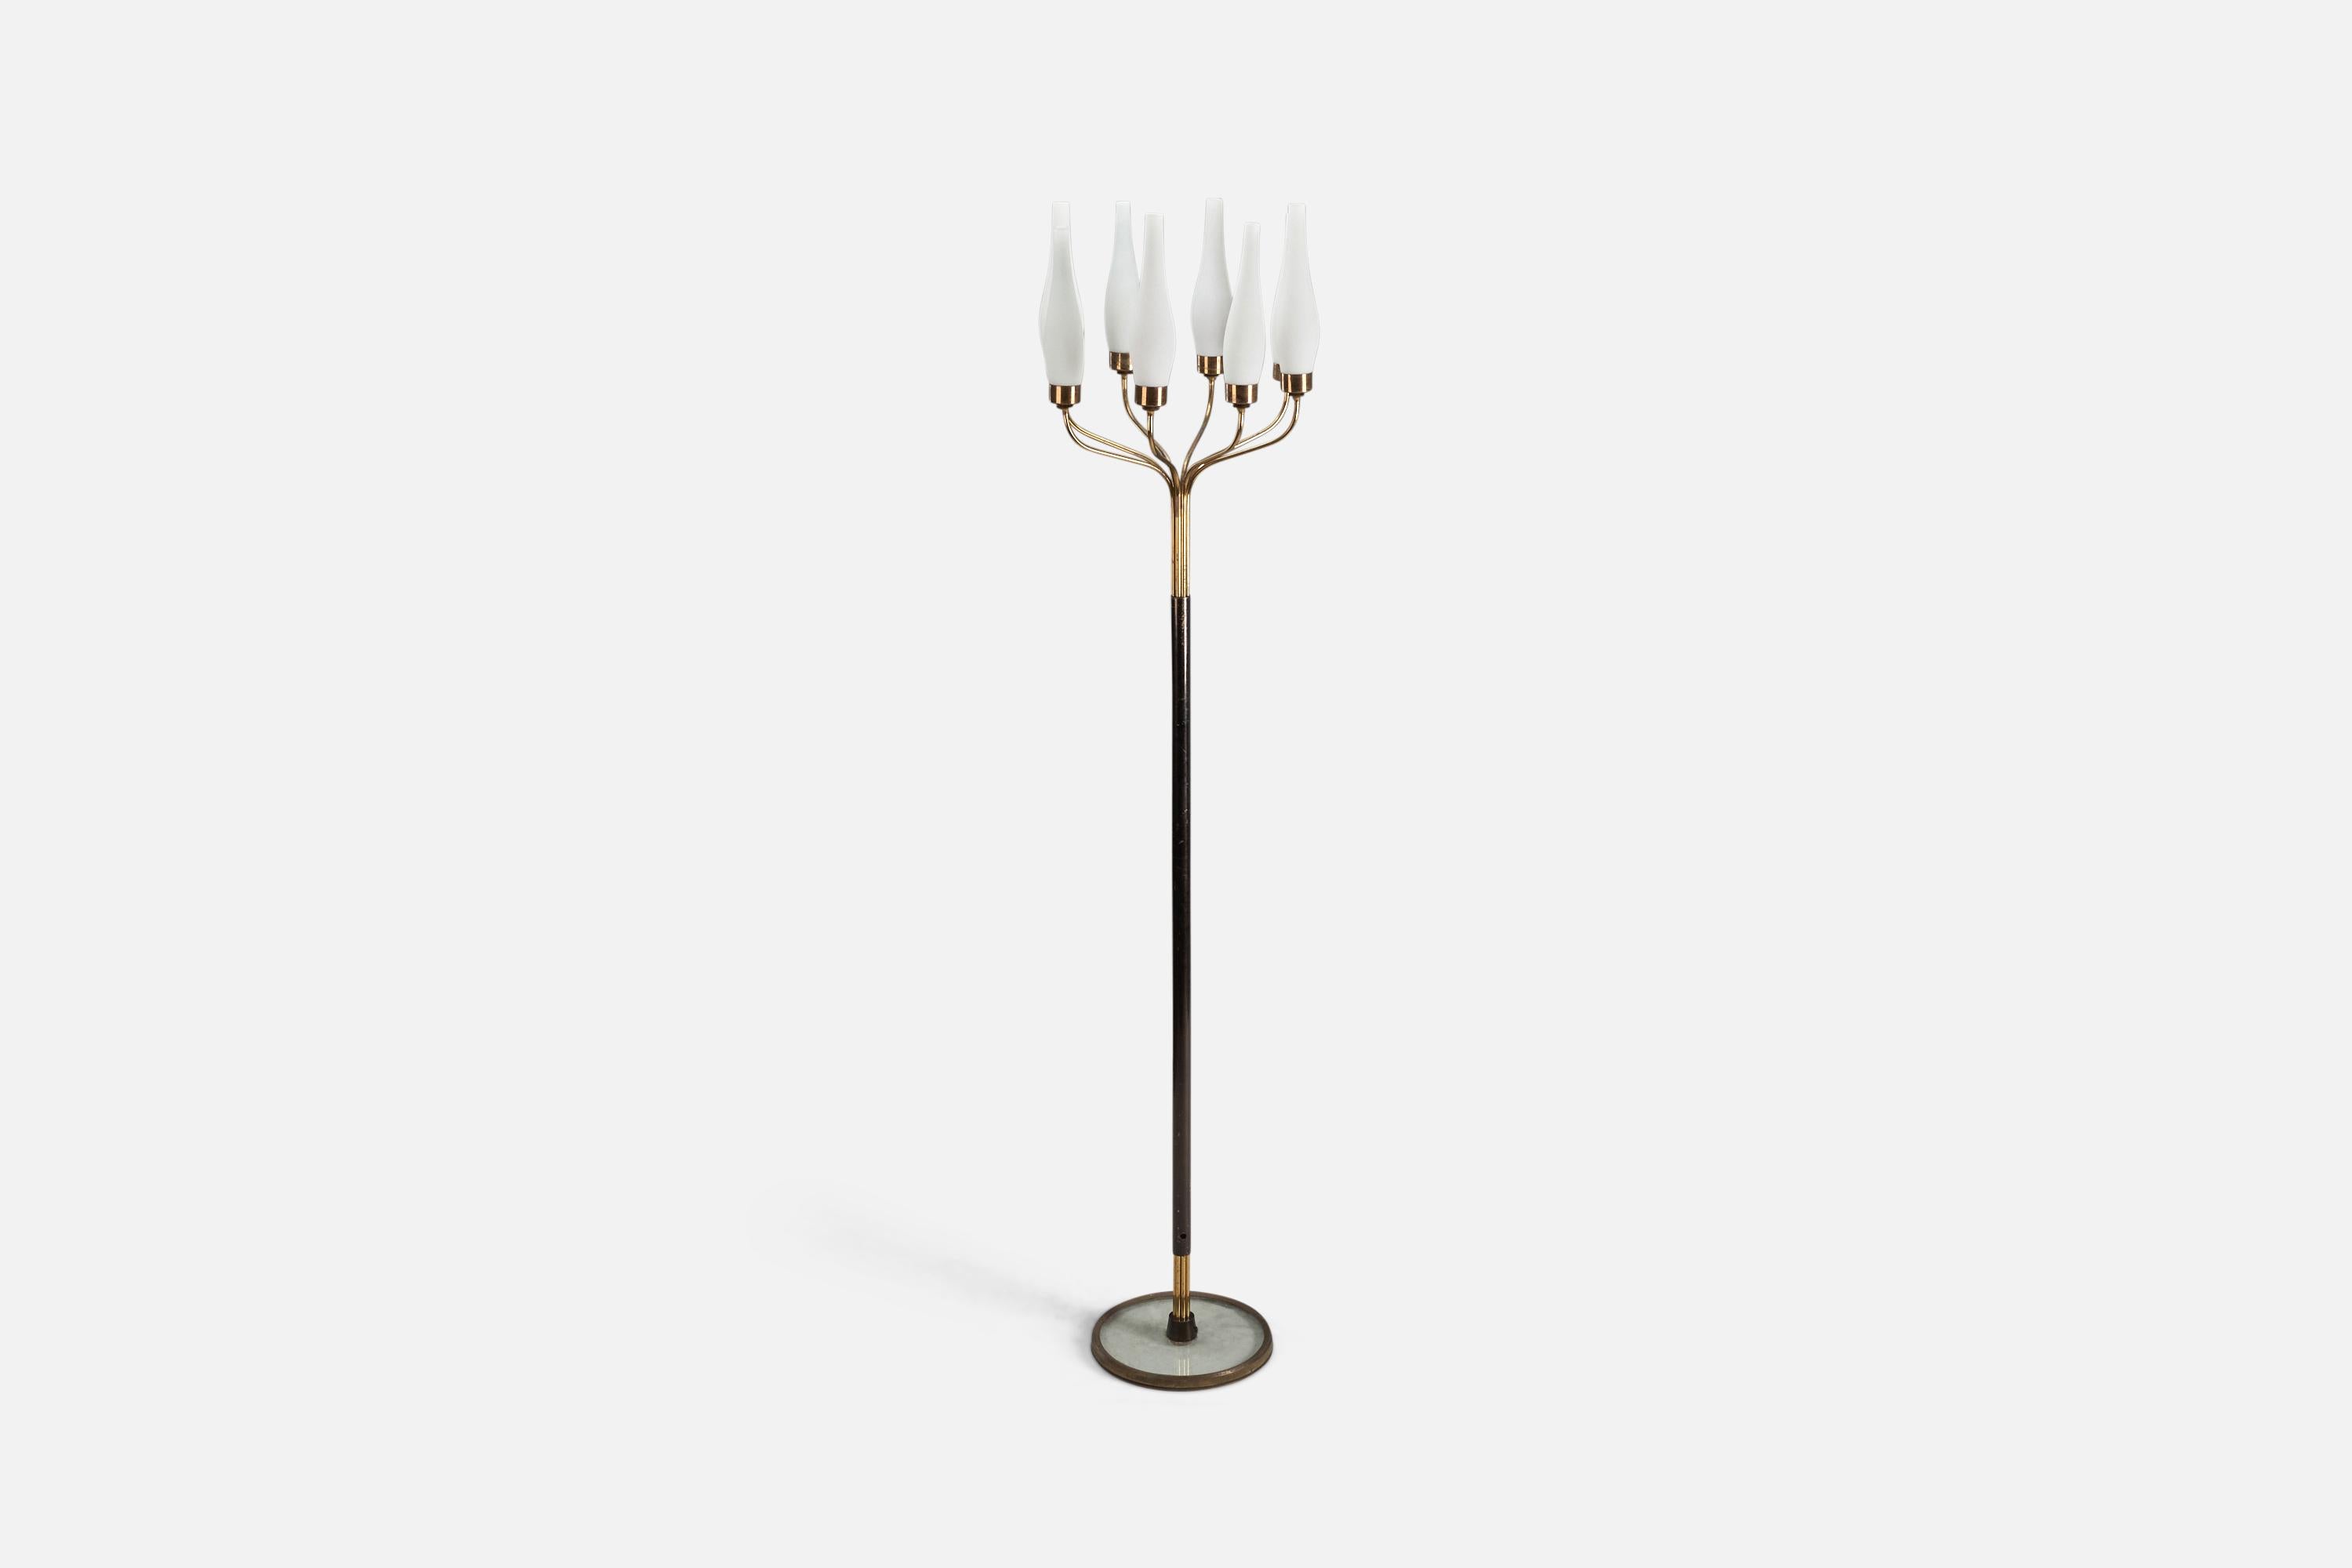 A brass, metal and glass floor lamp designed and produced by an Italian Designer, Italy, 1950s.

Sockets take E-14 bulbs.

There is no maximum wattage stated on the fixture.